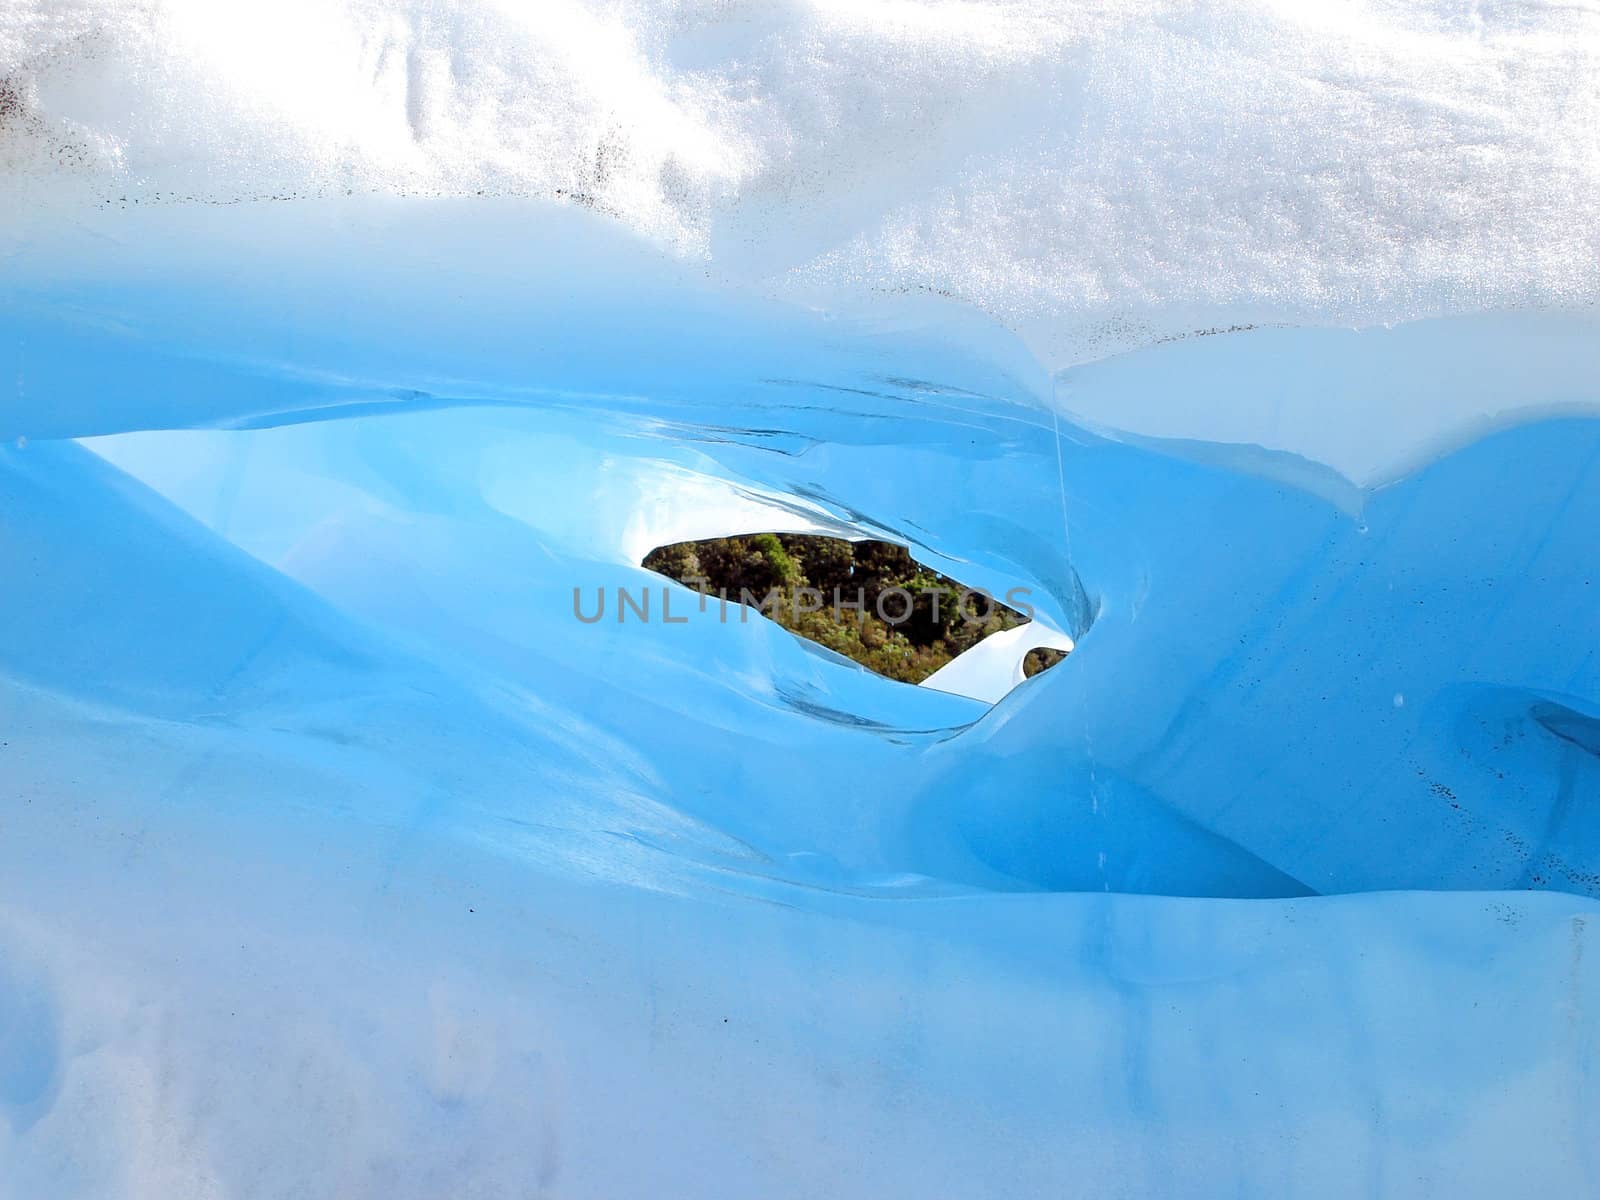 Melting Tunnel of Ice on Fox Glacier, New Zealand by Cloudia